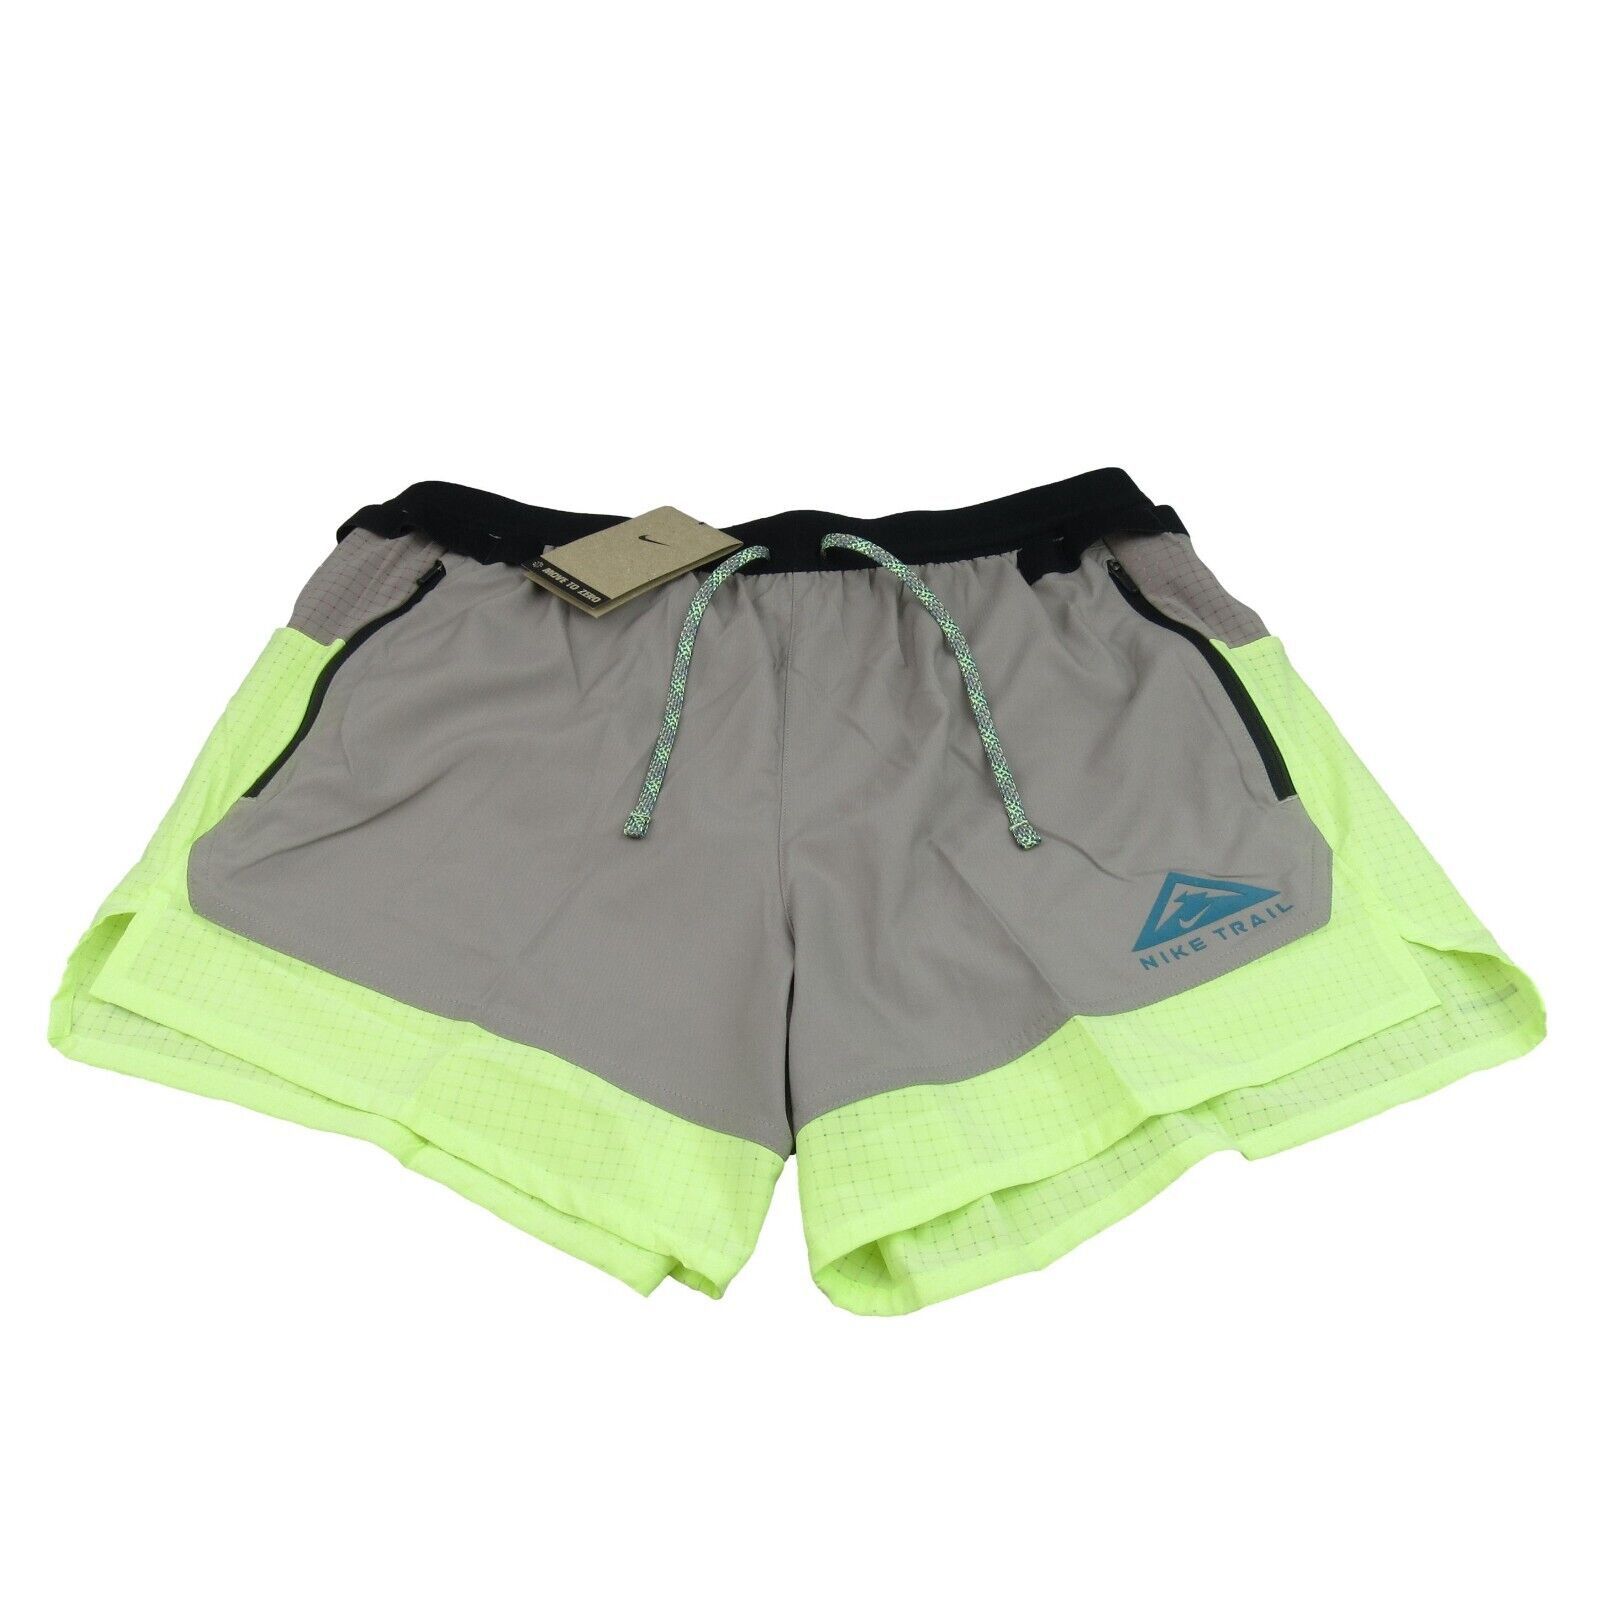 Primary image for Nike Flex Stride Trail Running Shorts Men's Size XL Lime Multi NEW DN4480-736